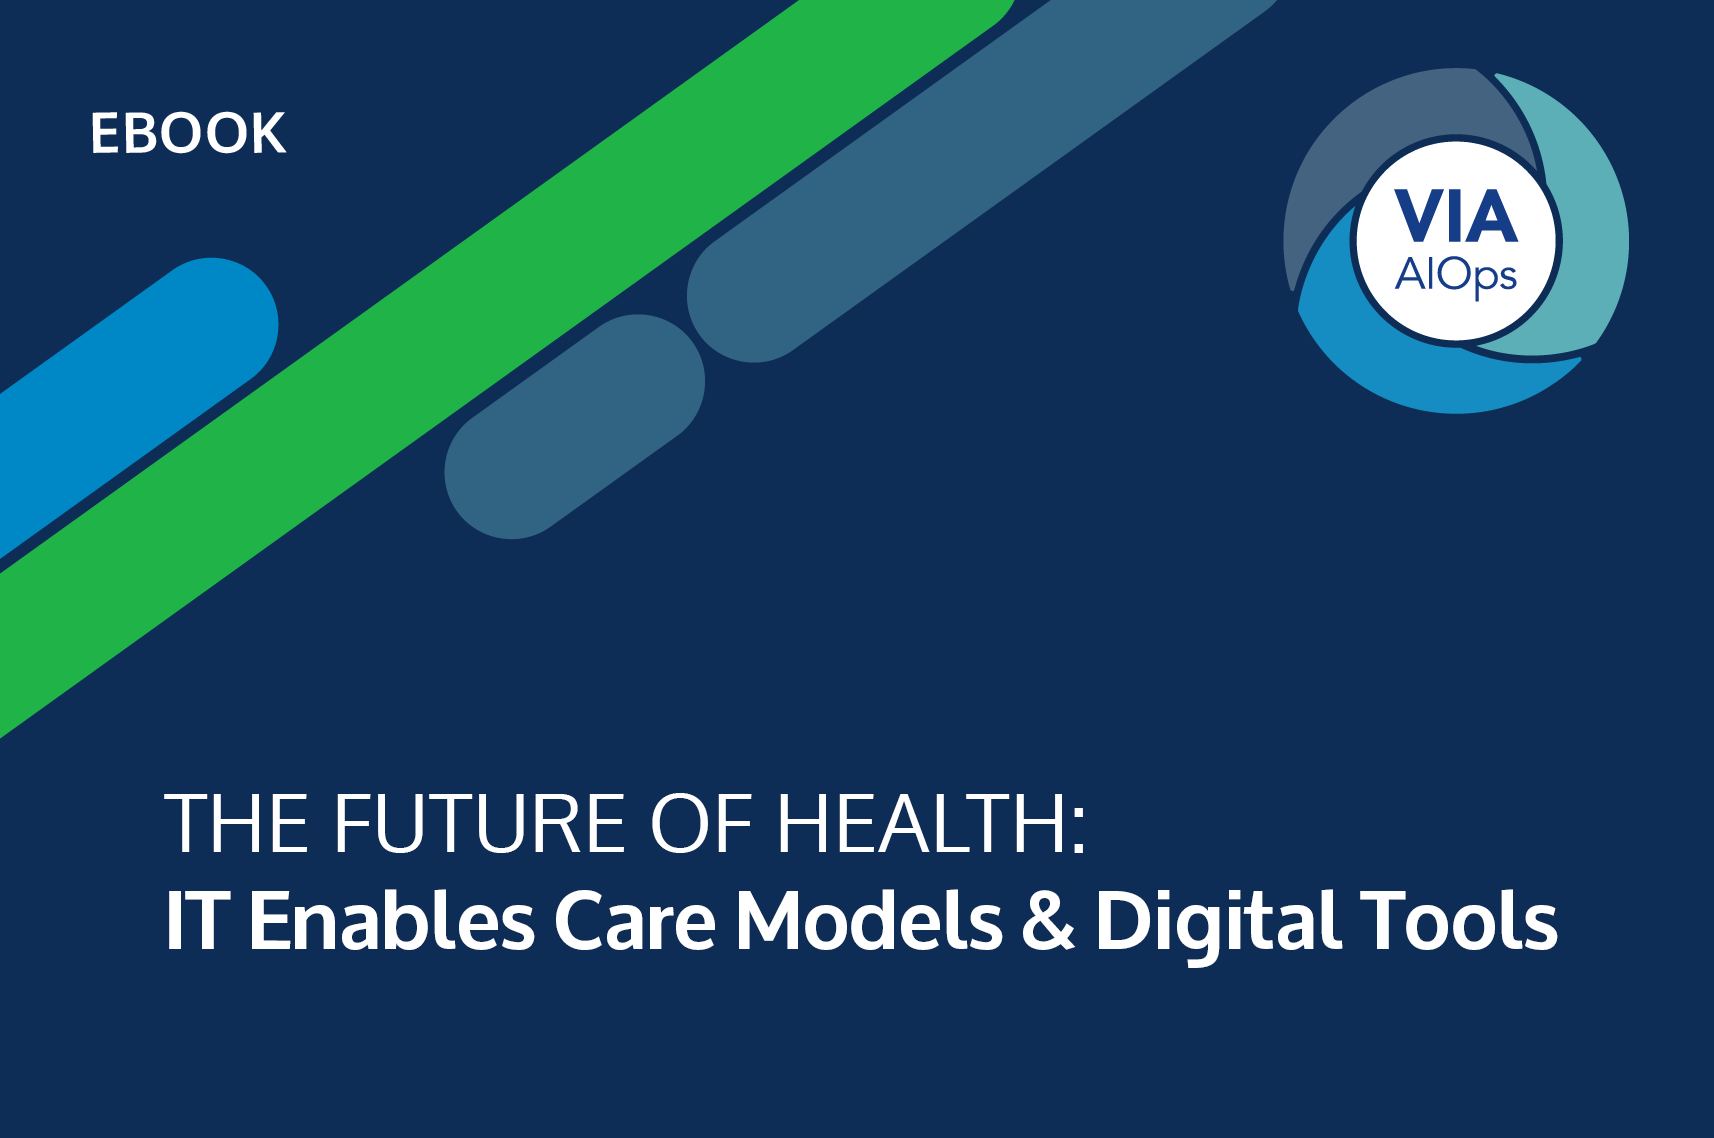 THE FUTURE OF HEALTH: IT Enables Care Models & Digital Tools